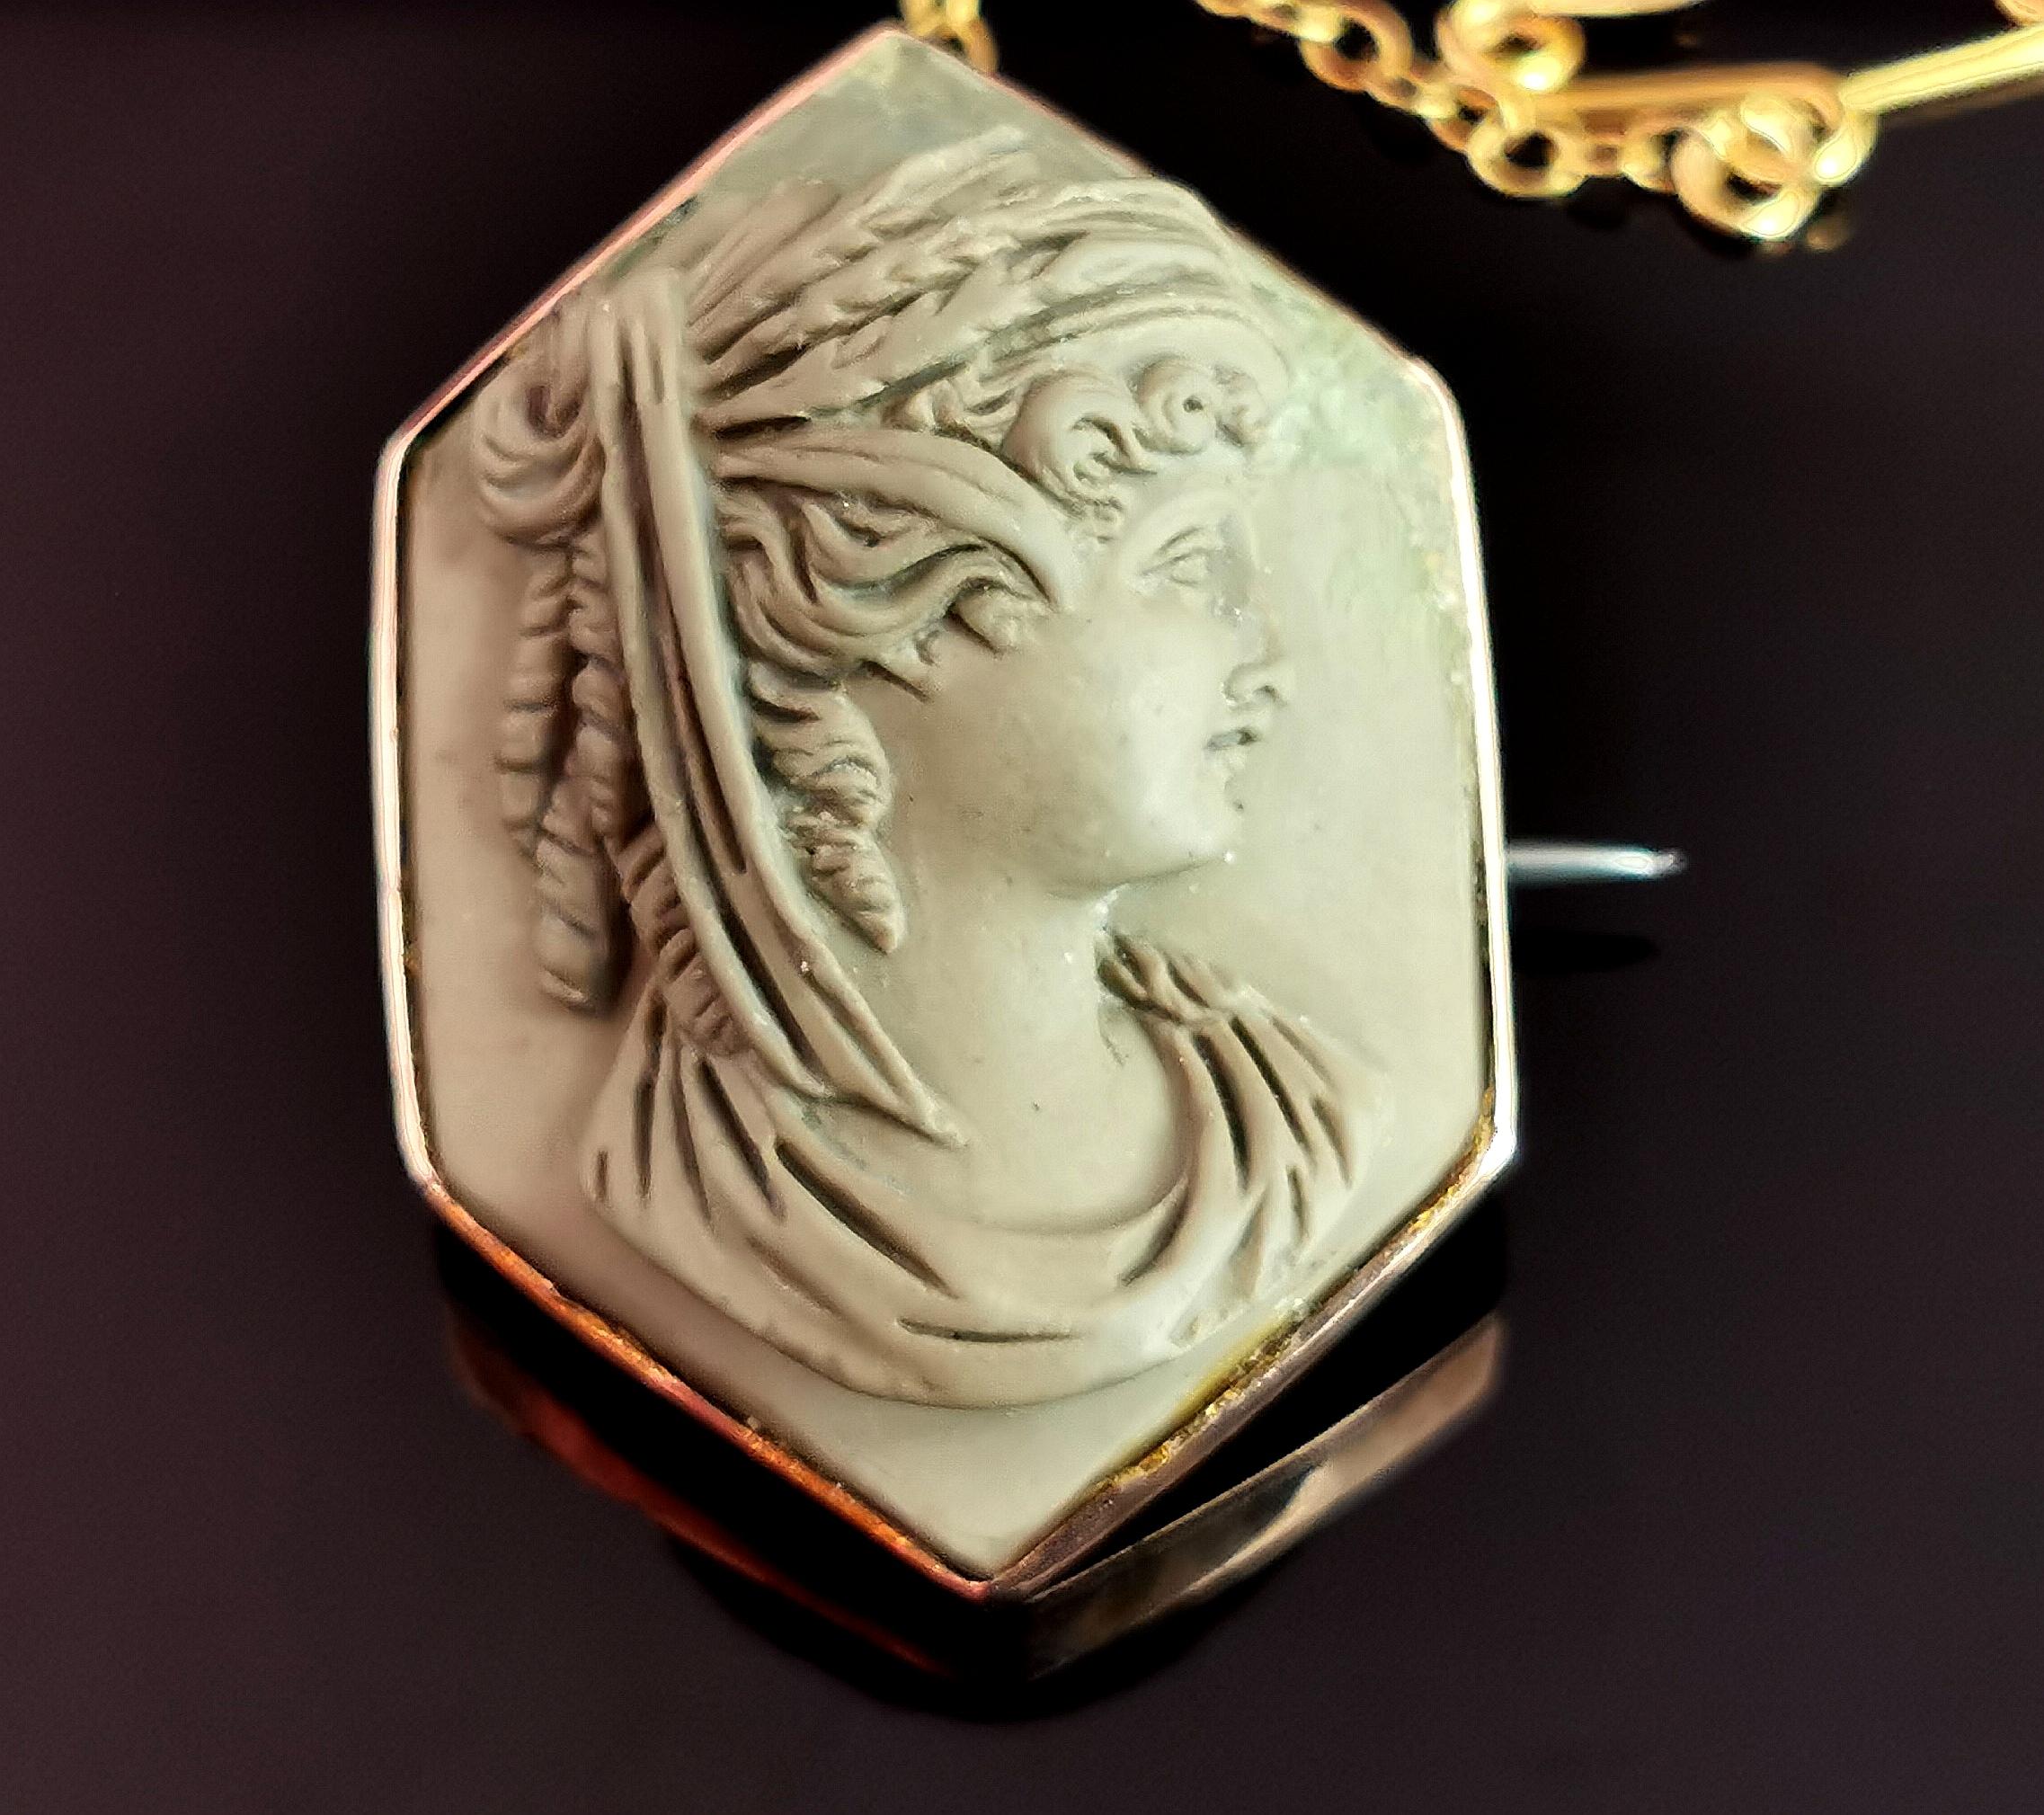 A beautiful antique, late 19th century Lava Cameo brooch.

It has a typical dark beige tone, finely carved with the profile of a classical lady.

Lava Cameos and Lava stone jewellery rose to fashion in the Grand Tour era, early 19th century.

They